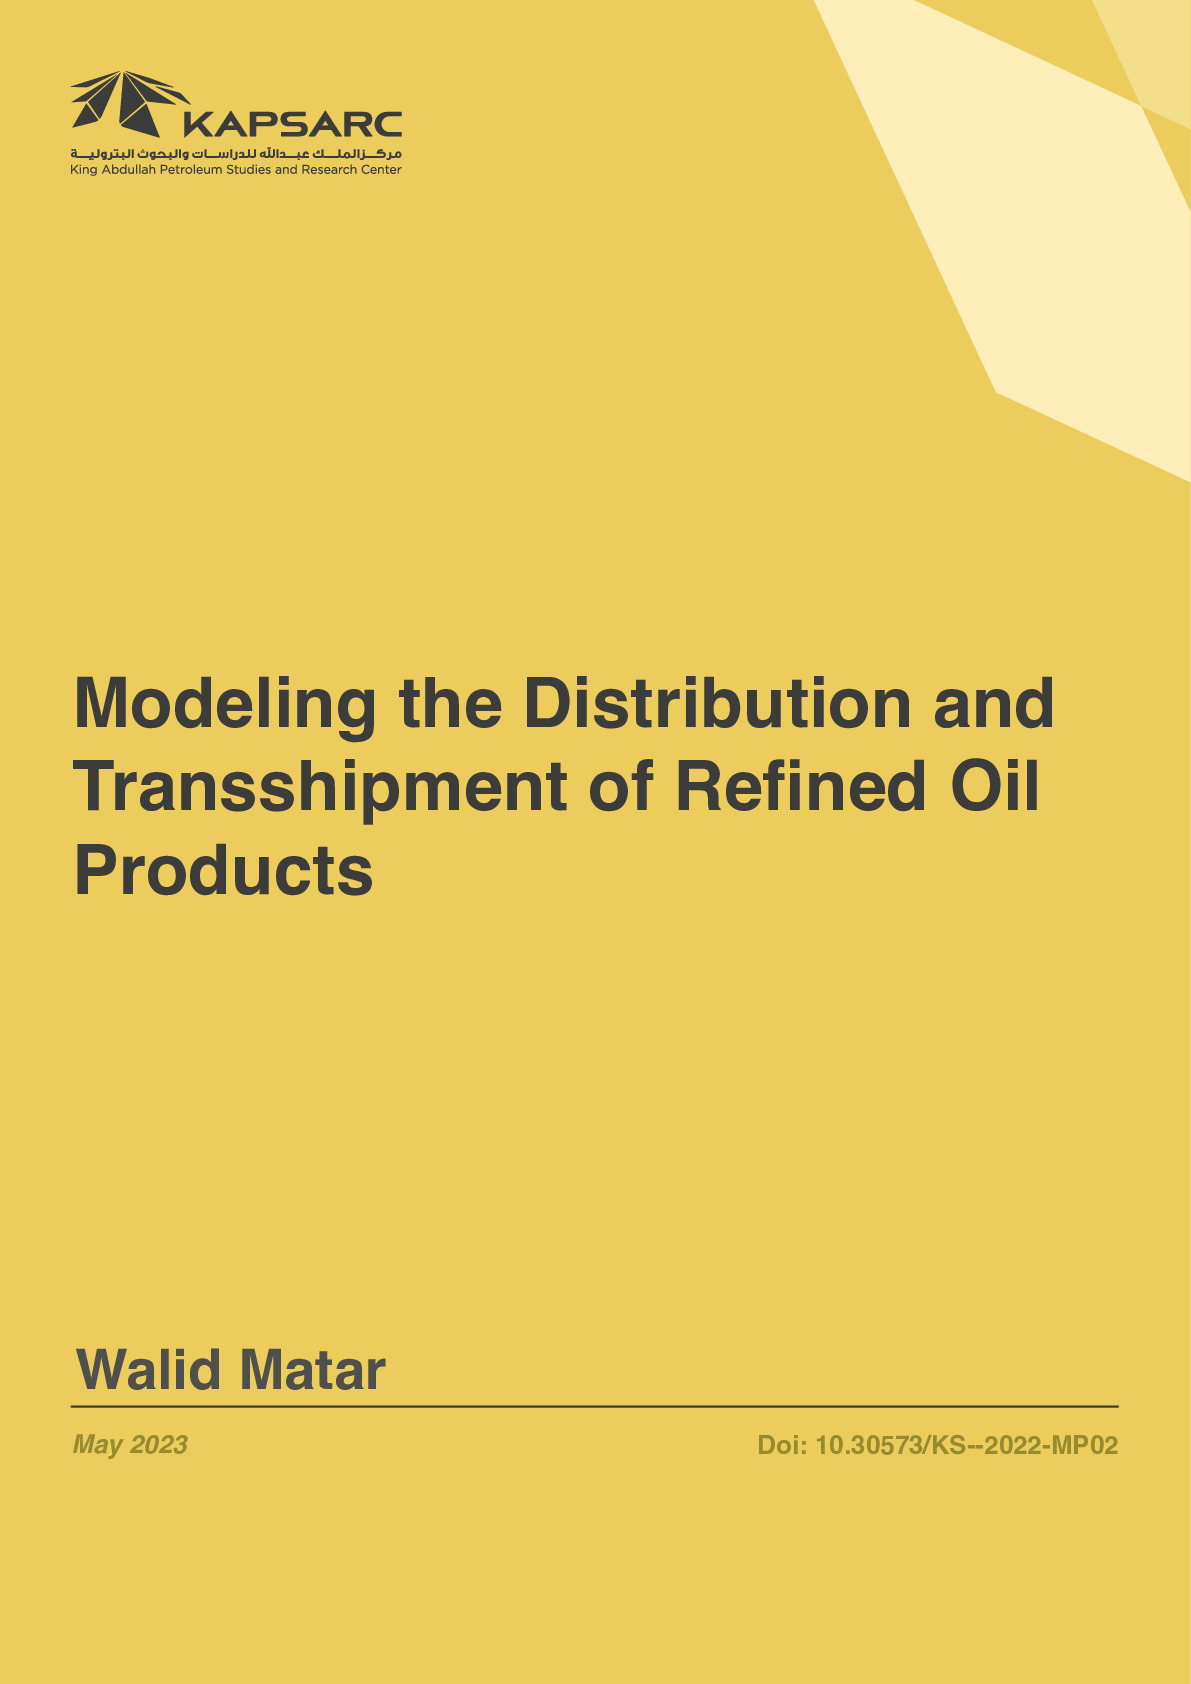 Modeling the Distribution and Transshipment of Refined Oil Products